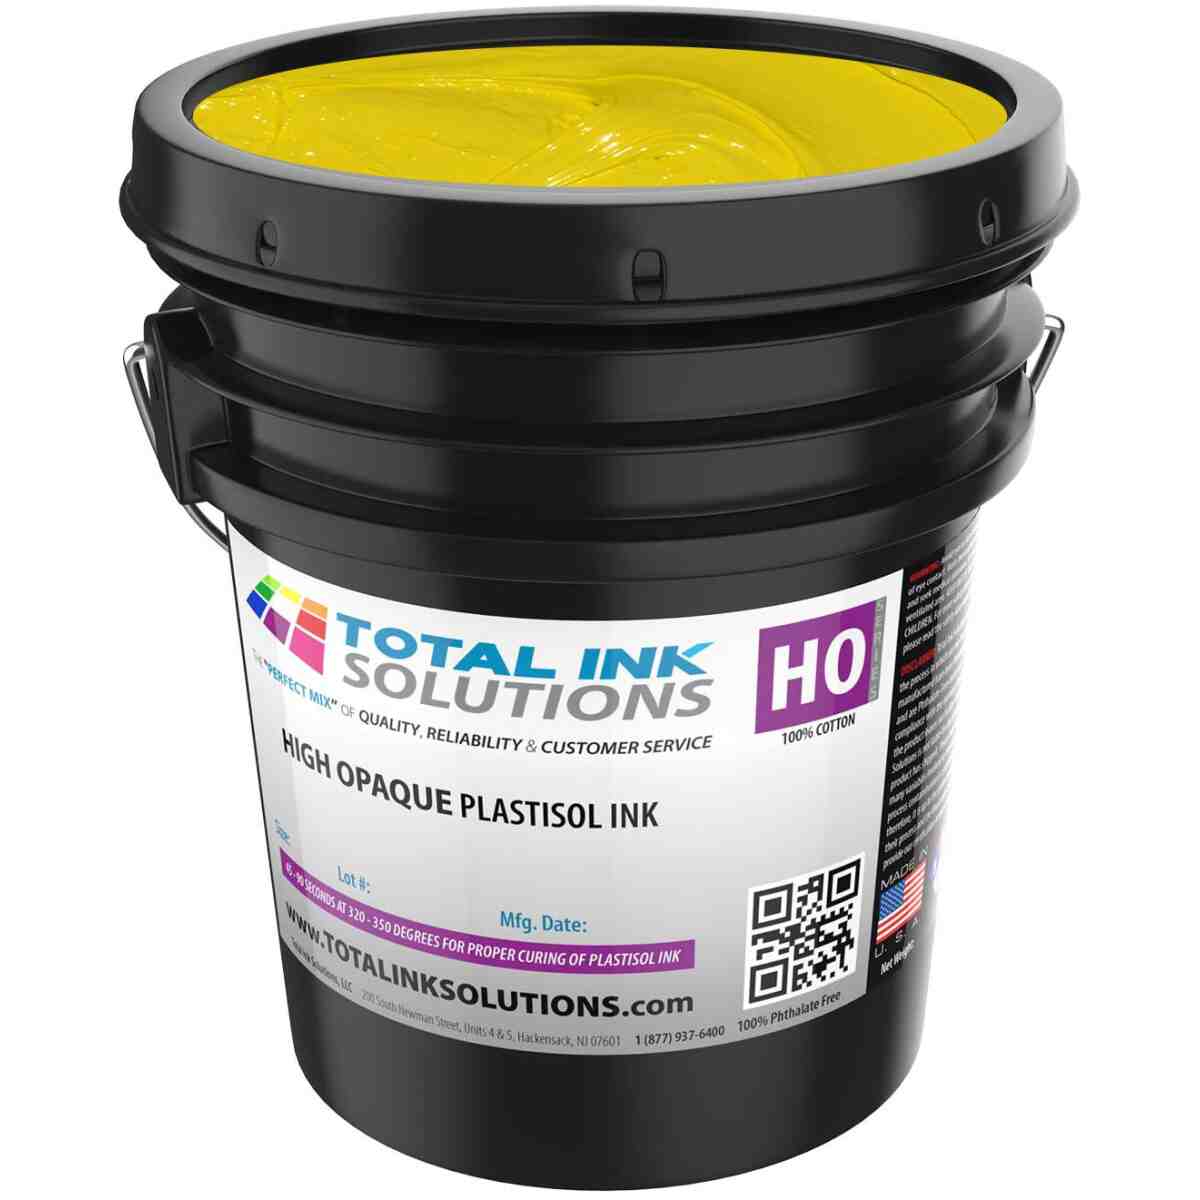 High Opaque Plastisol Ink – 5 Gallon TOTAL INK SOLUTIONS®